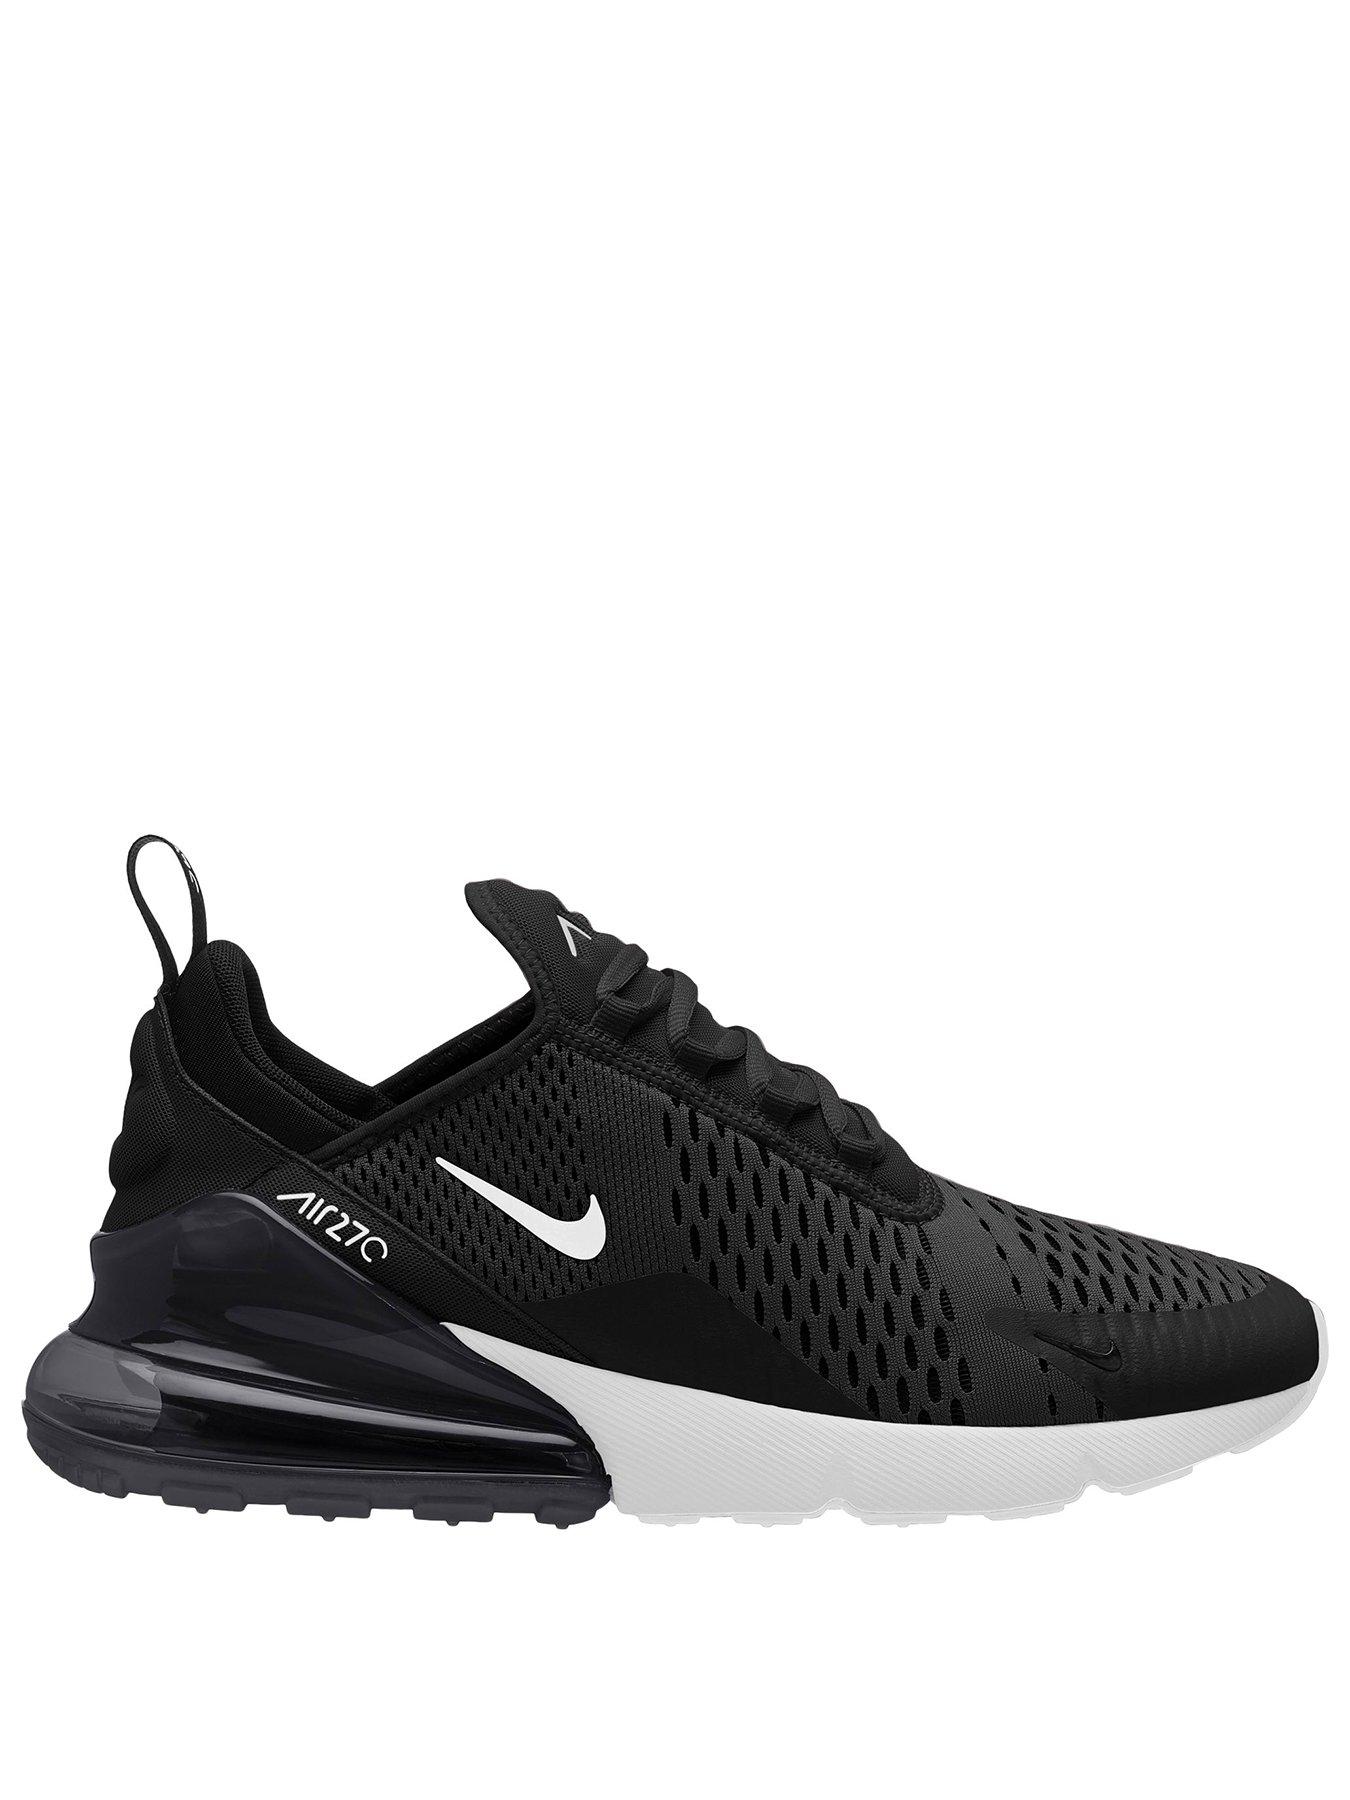 black and white air max 270s